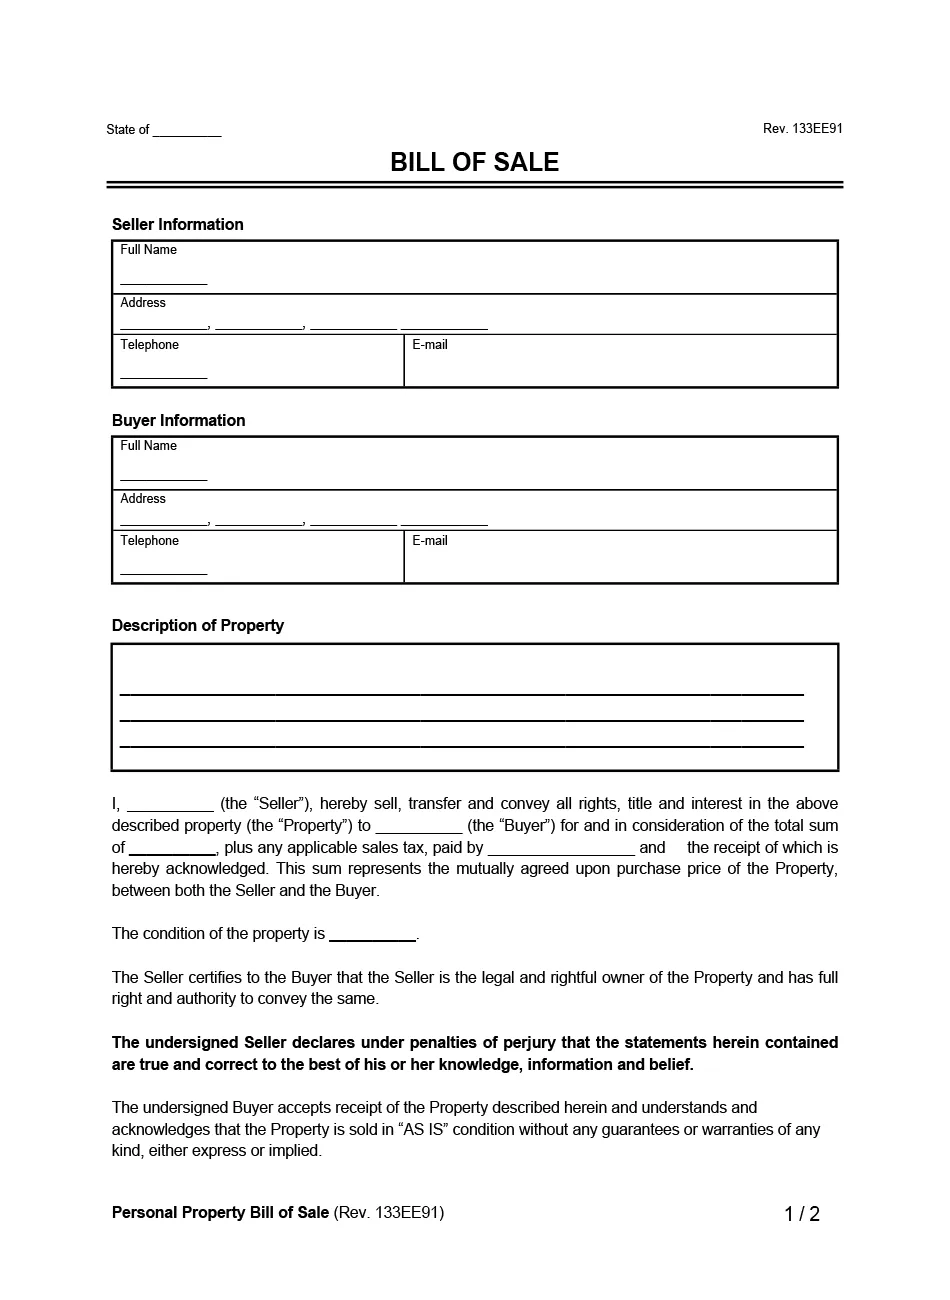 Personal Property Bill of Sale Example Form